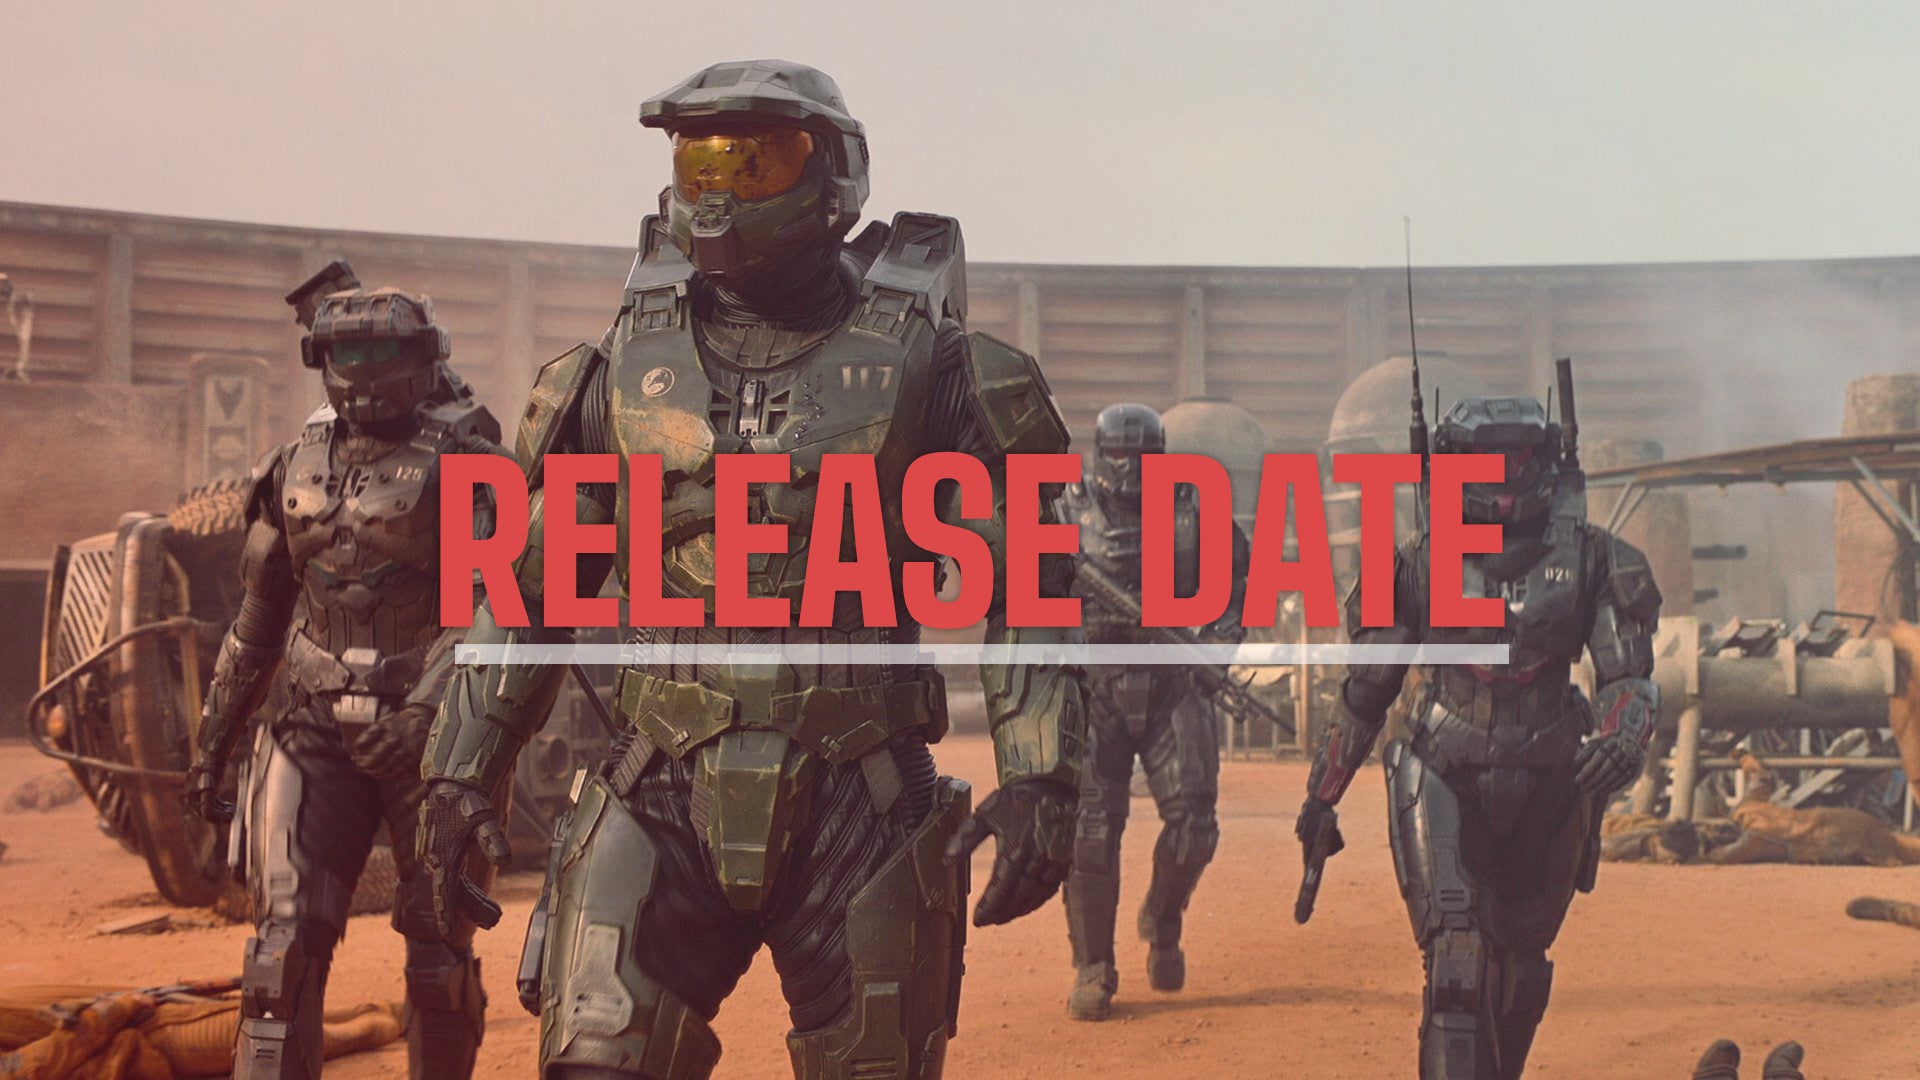 Image for The Halo TV series finally has an actual, solid release date